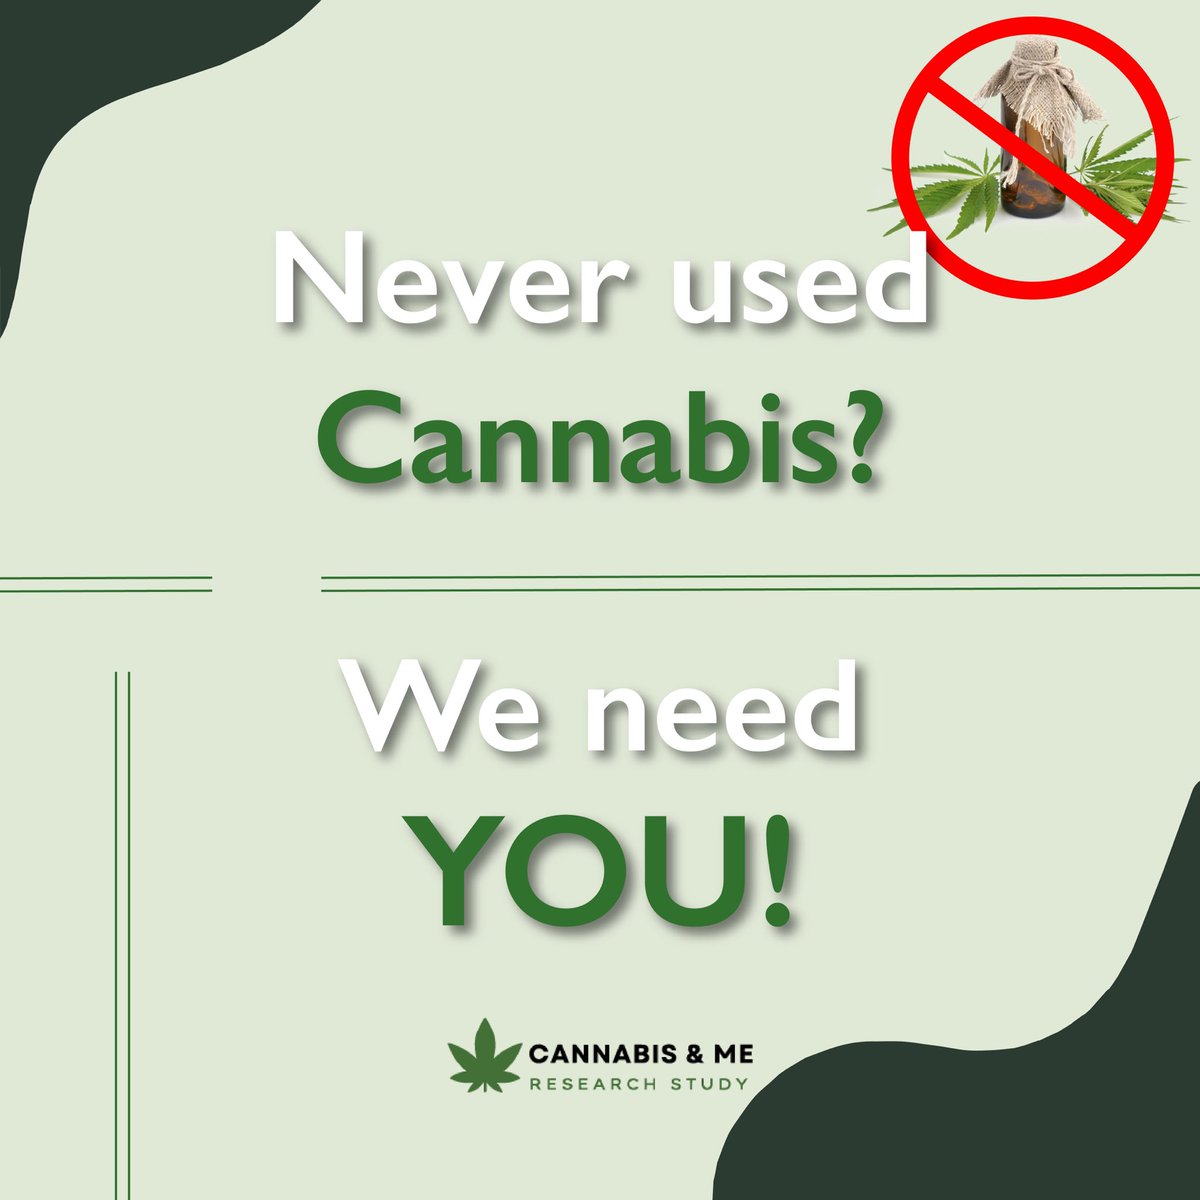 Get the word out, we need #cannabis non-users! 
•
If you have never used #cannabis we would love to hear from you!! Just click the link in our bio to complete our survey😊
•
#cannabisresearch #survey #cannabisandme @KingsCollegeLon